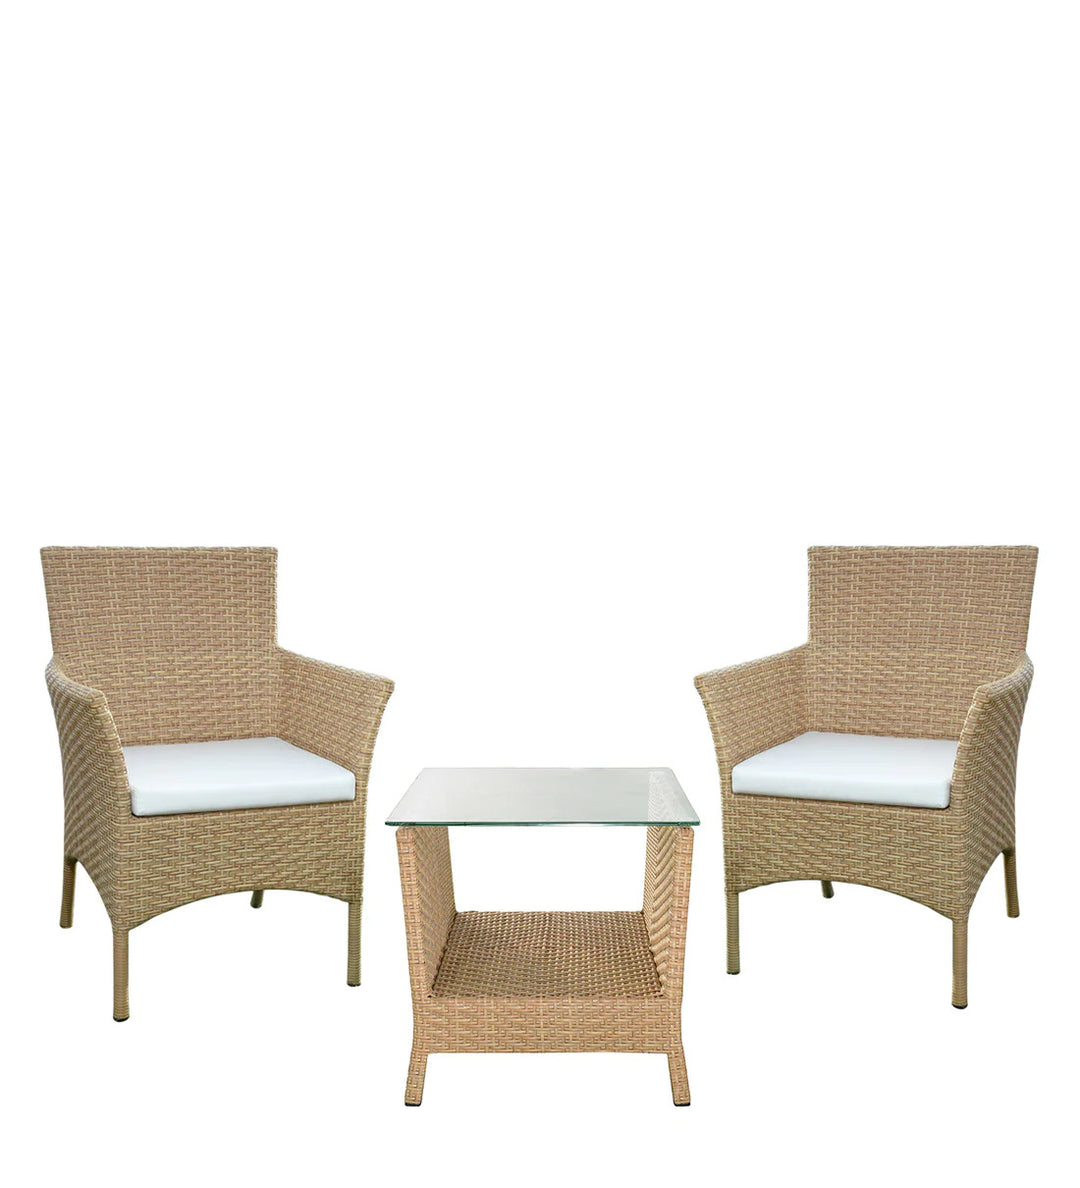 Dreamline Outdoor Furniture Garden Patio Seating Set 1+2 2 Chairs and Table Set Balcony Furniture Coffee Table Sets (Cream)